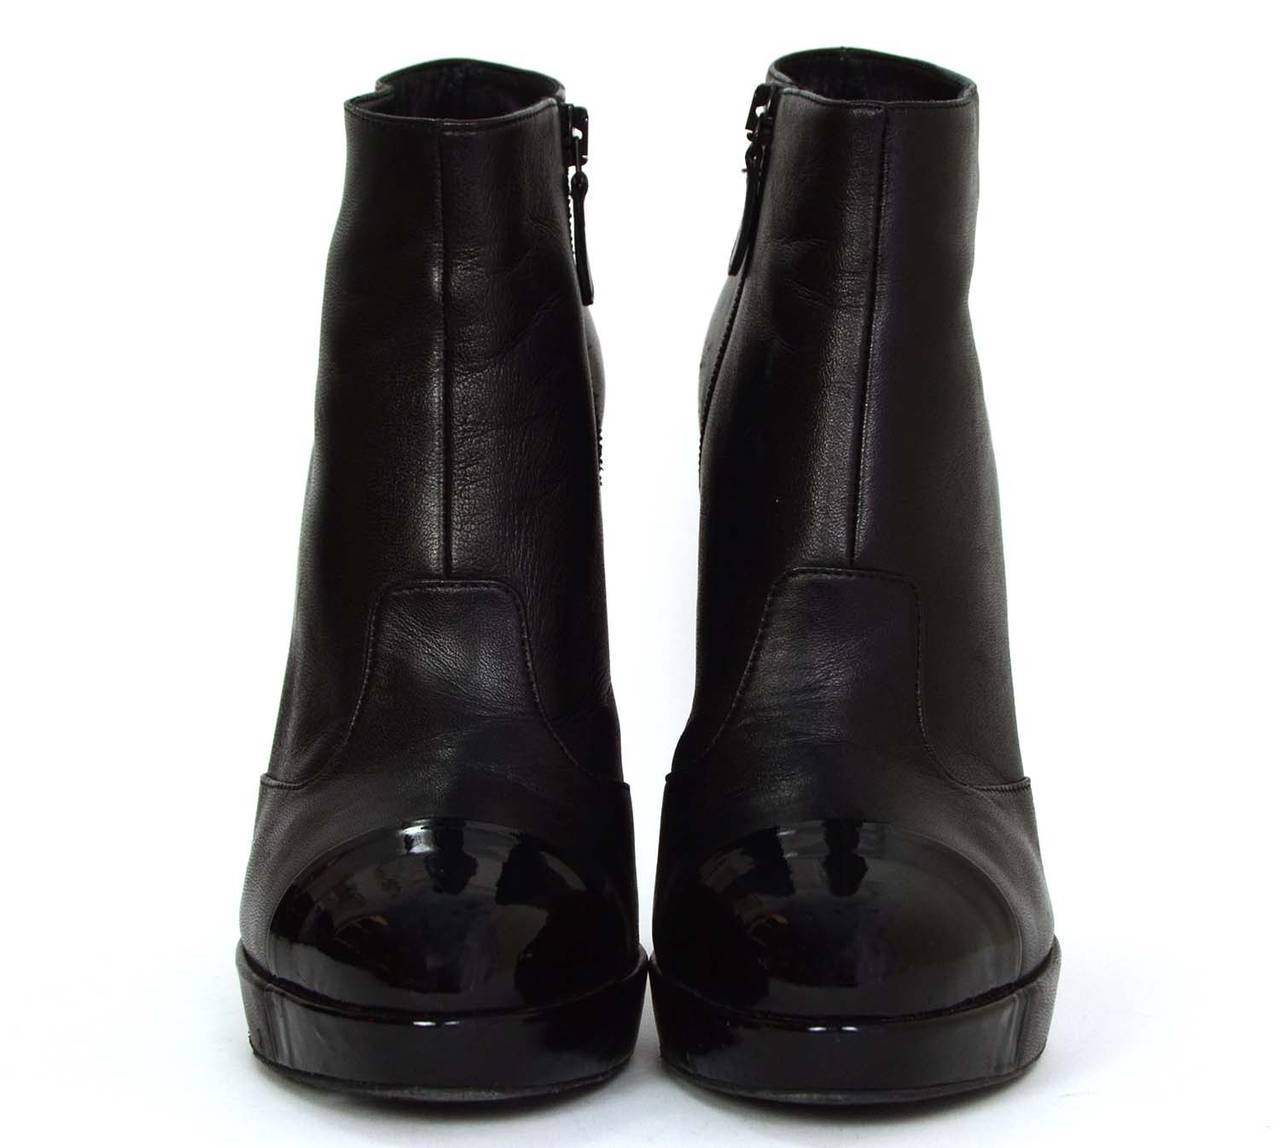 Chanel Black Leather Platform Ankle Boots
Features black patent covered toes and silvertone CC's at back of inner ankle
Made in: Italy
Color: Black
Composition: Leather
Sole Stamp: CC MADE IN ITALY 39
Serial Number/Date Code: D